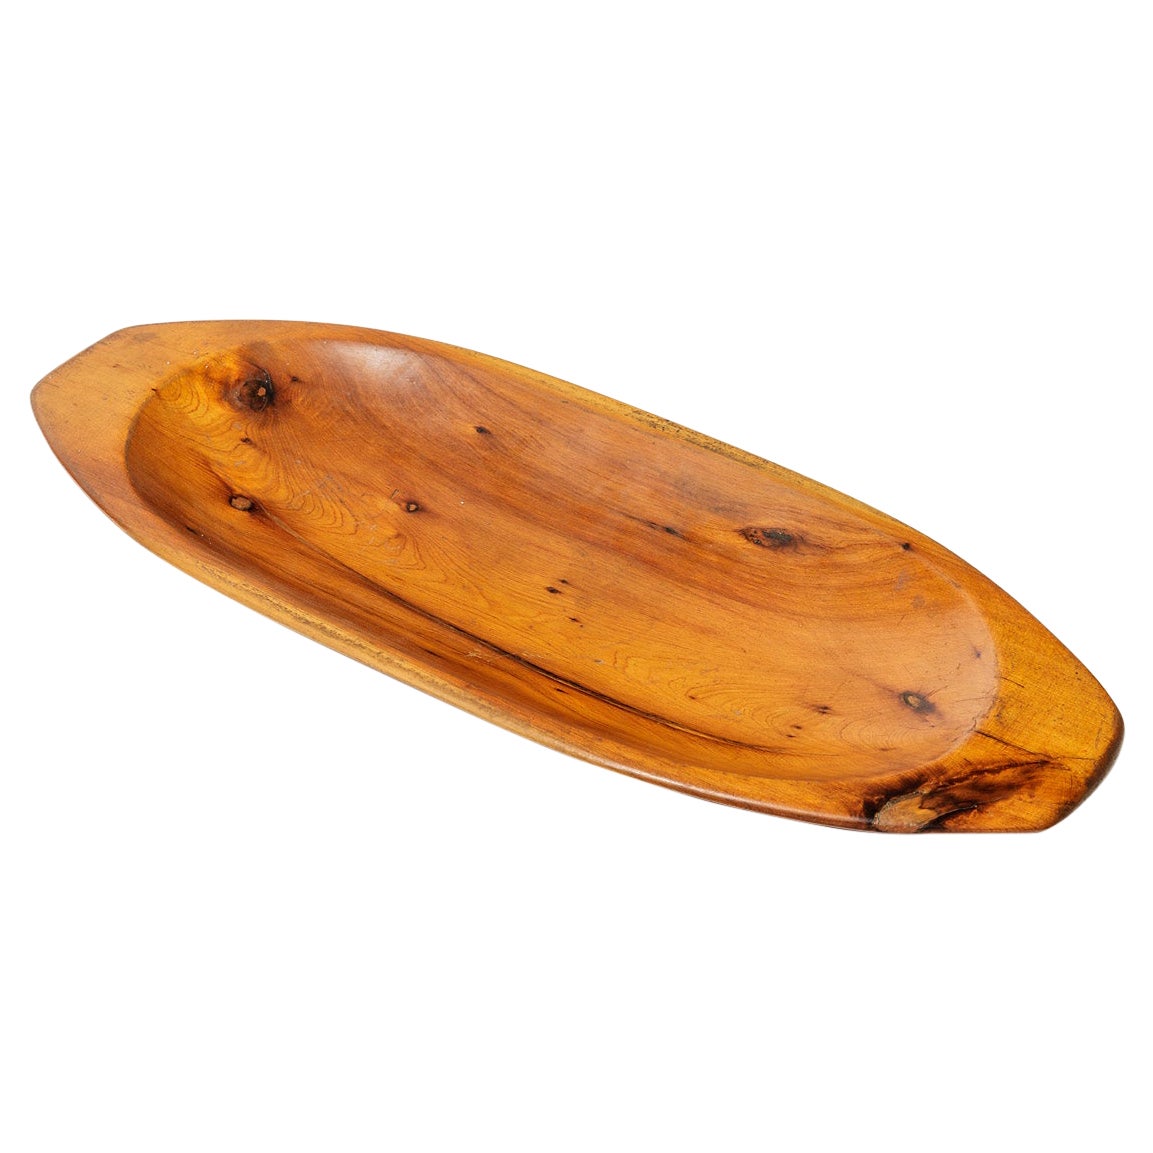 Olive Wood Sculptural Plate or Dish circa 1950 French Design Bowl